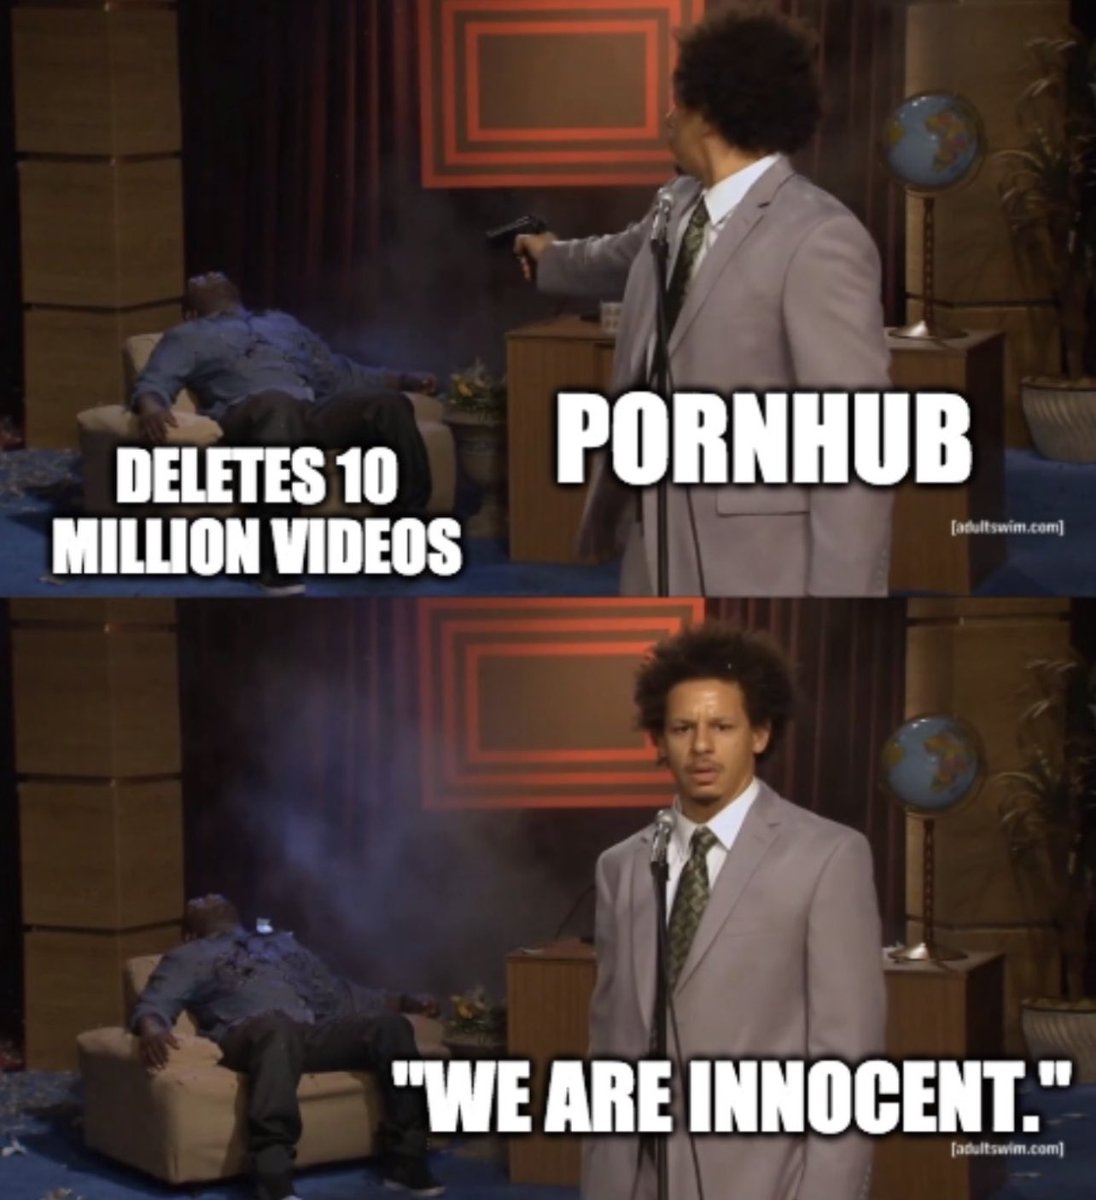 Pornhub tried to delete the crime scene by removing 10 million videos (80% of the whole site). Too little too late. Lock them up. #Traffickinghub  